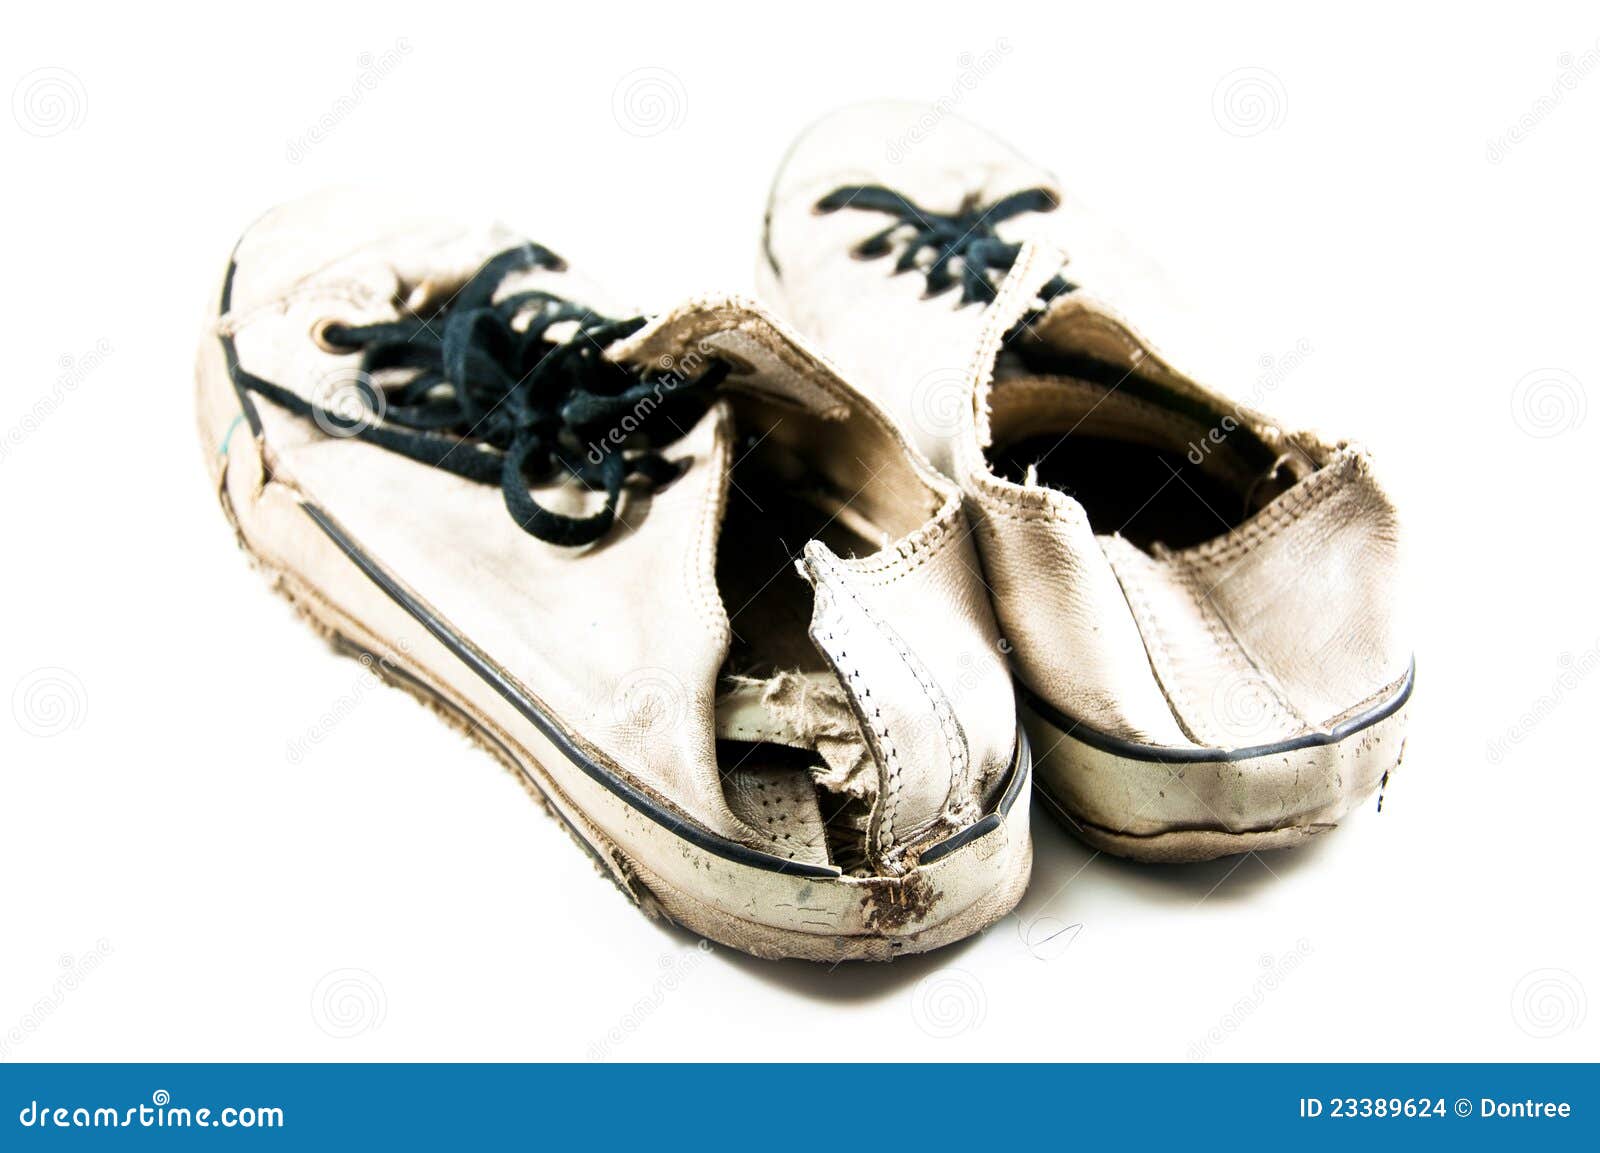 Old sneakers stock photo. Image of baseball, brown, tennis - 23389624